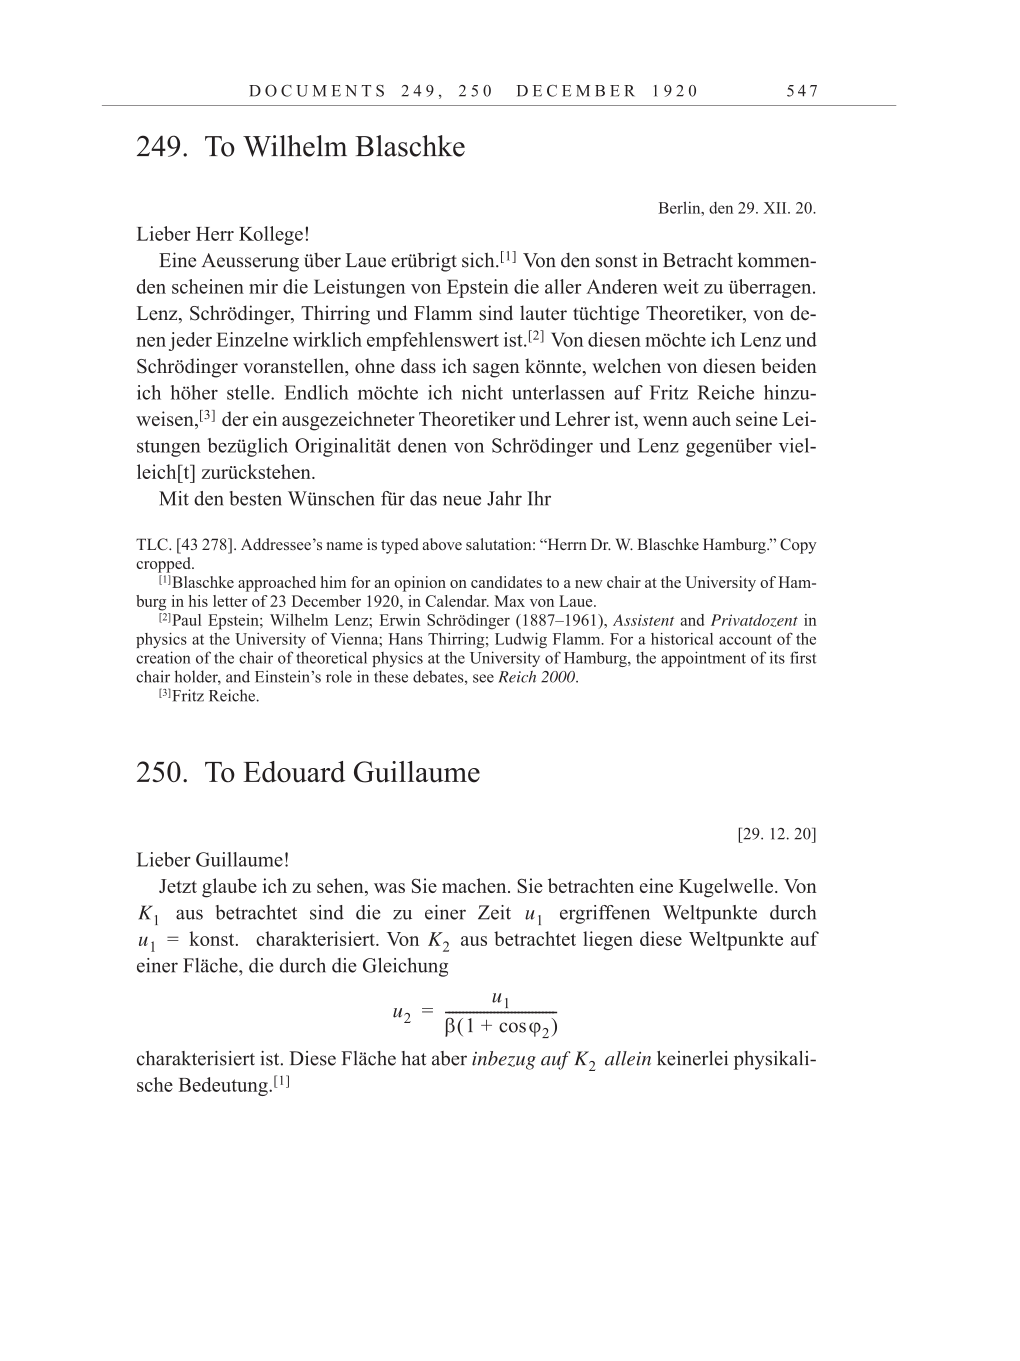 Volume 10: The Berlin Years: Correspondence May-December 1920 / Supplementary Correspondence 1909-1920 page 547